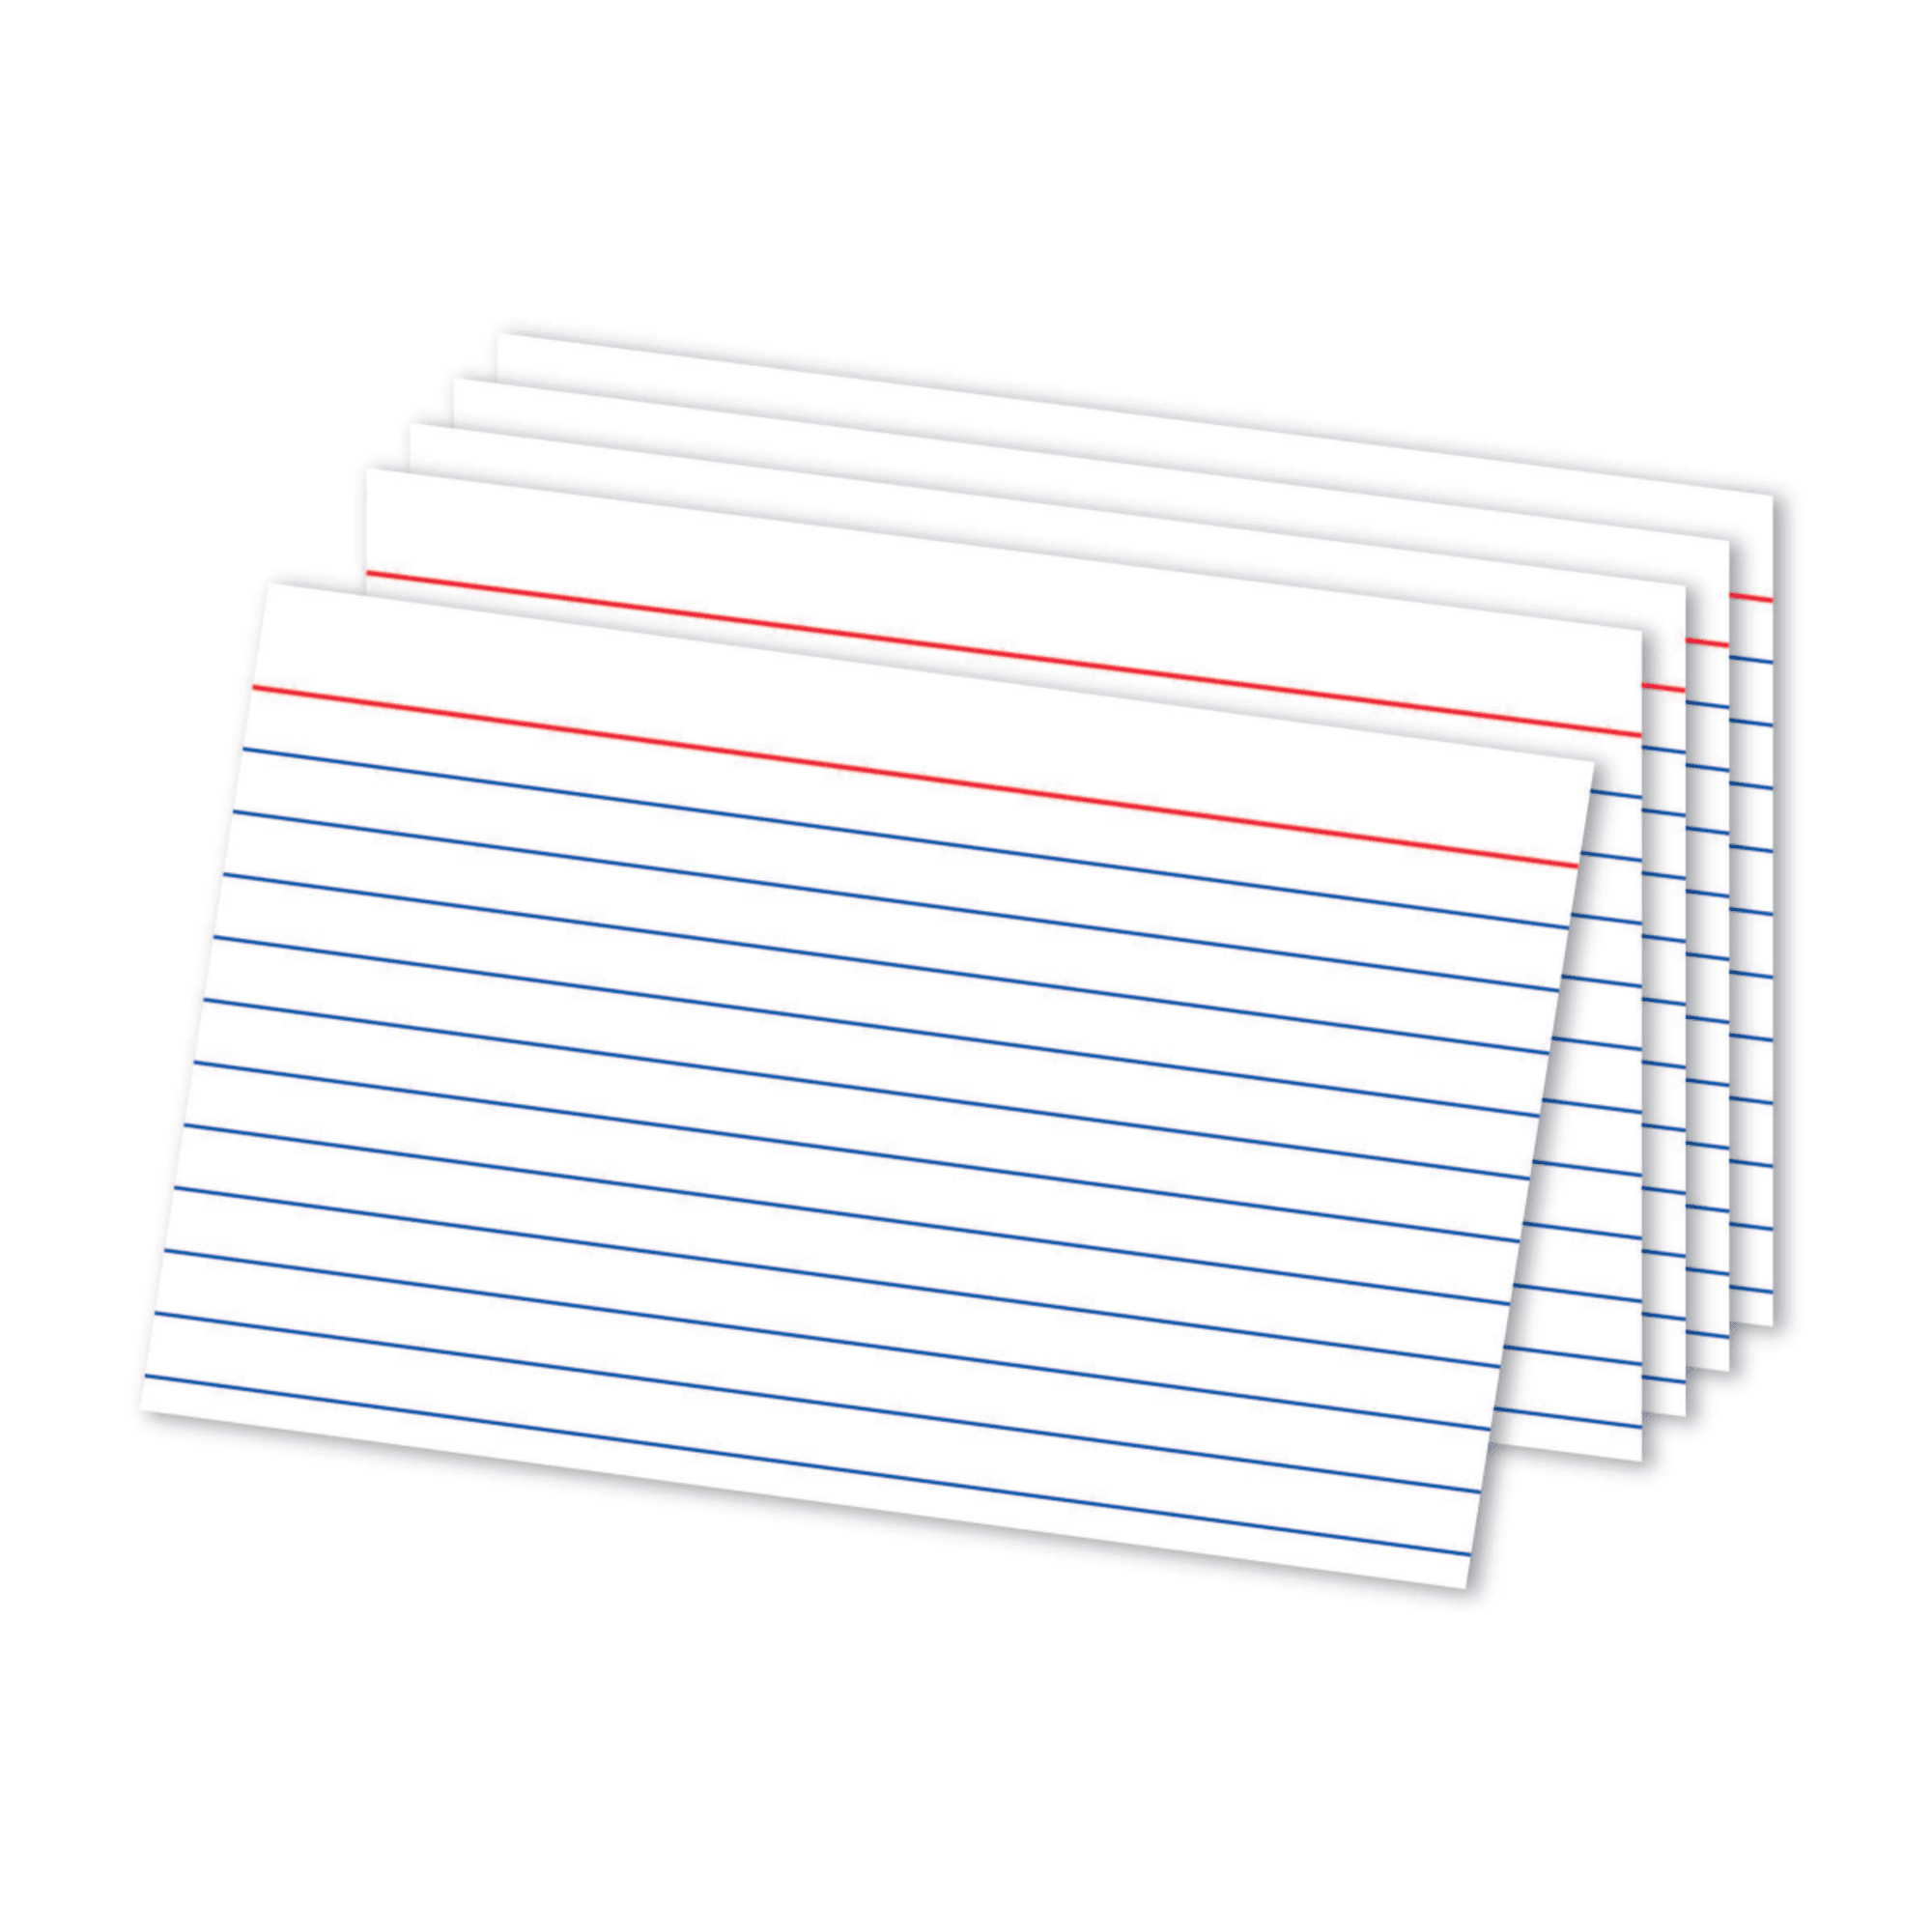 Office Depot Brand Ruled Filler Paper 8 12 x 11 Wide Ruled White Pack Of  500 Sheets - Office Depot